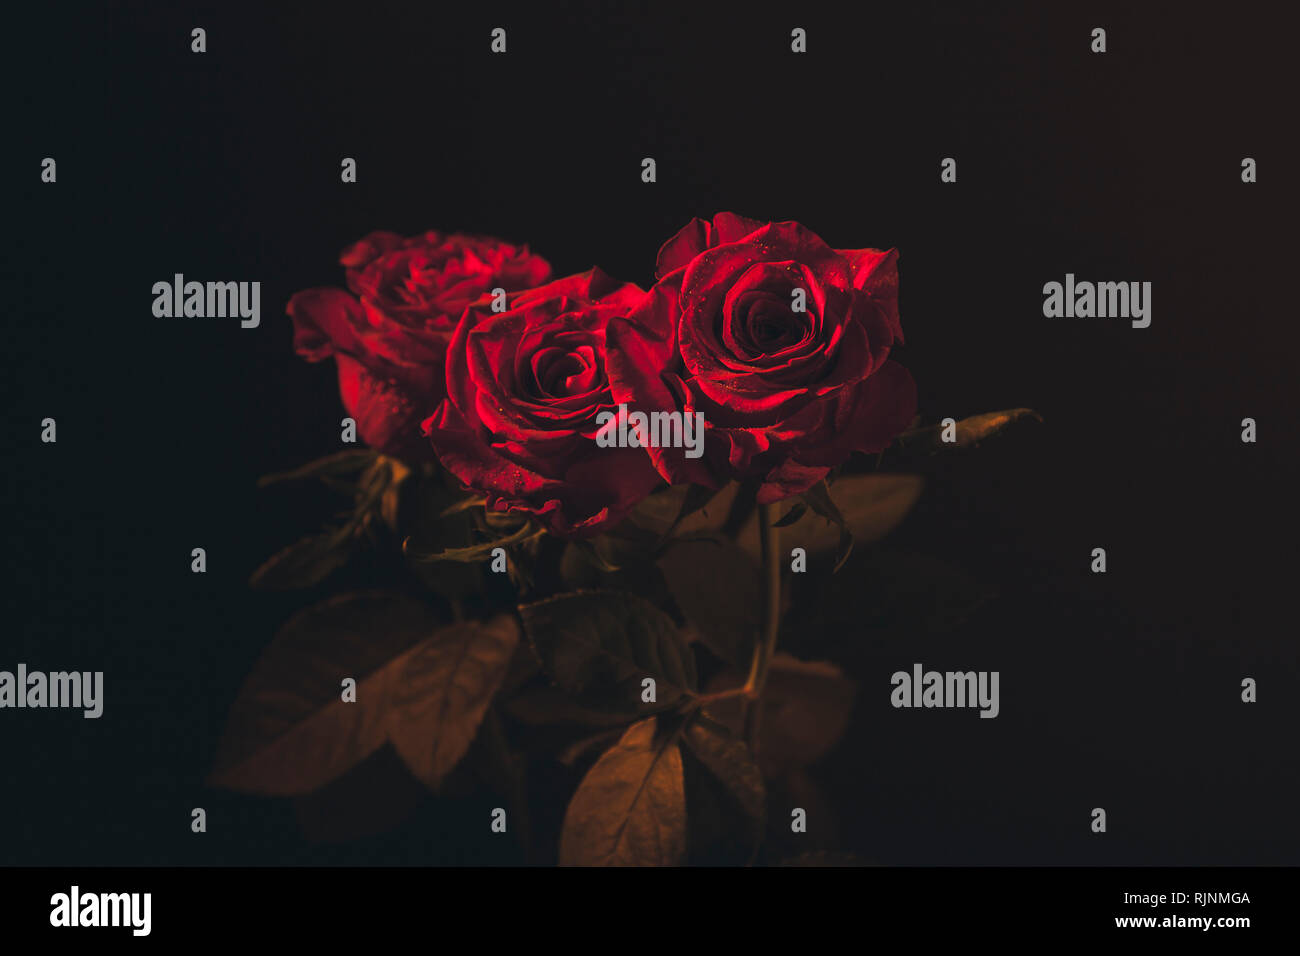 Fully opened red roses with water drops colourful background Stock Photo